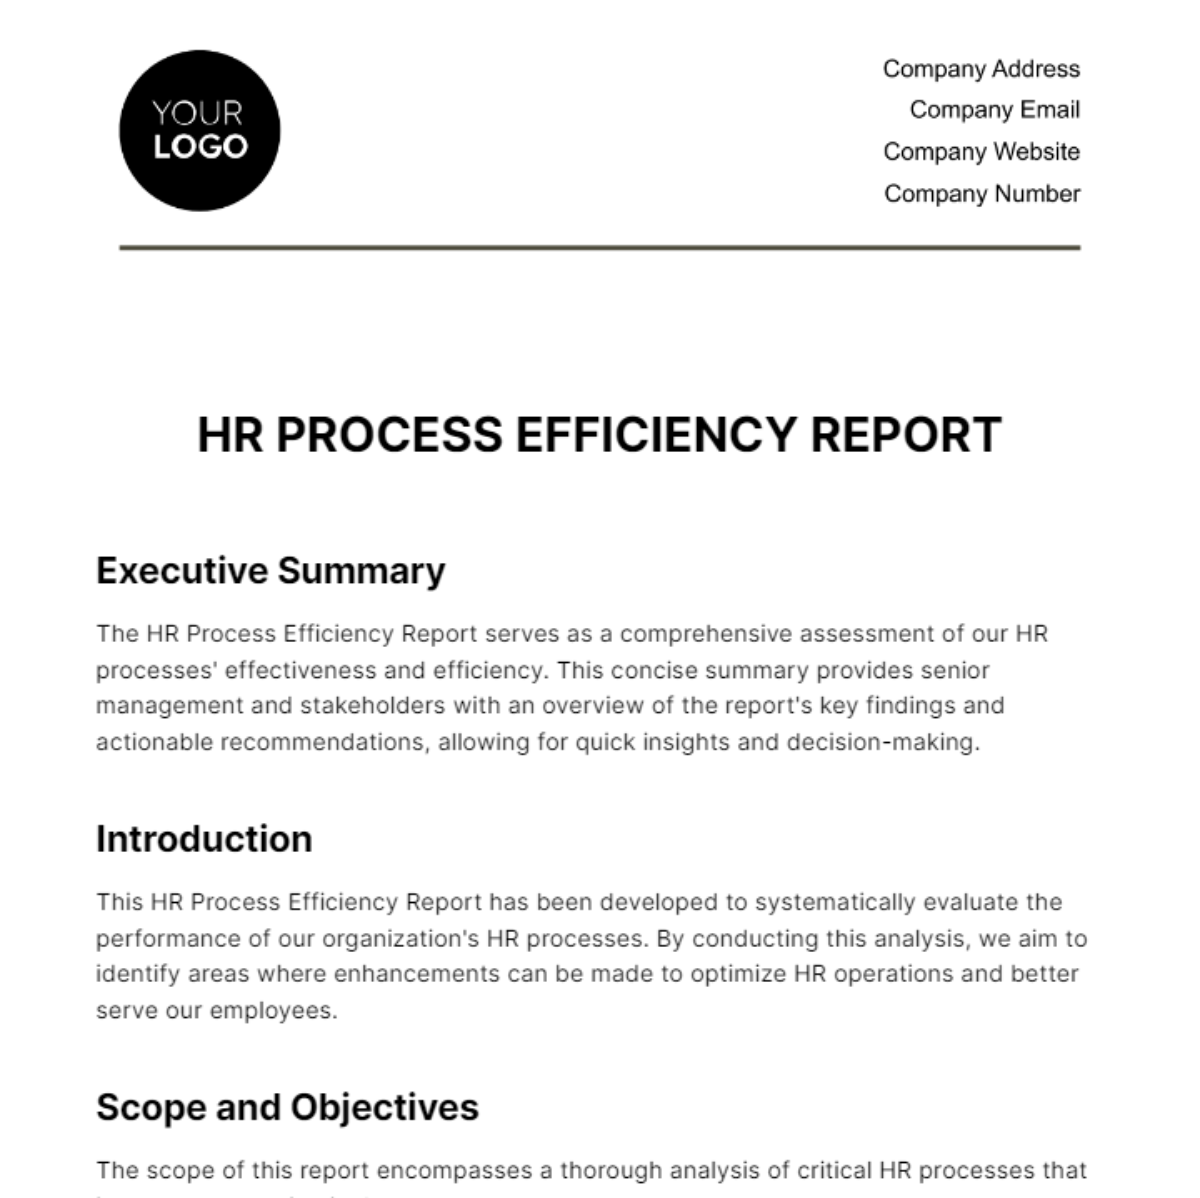 Free HR Process Efficiency Report Template